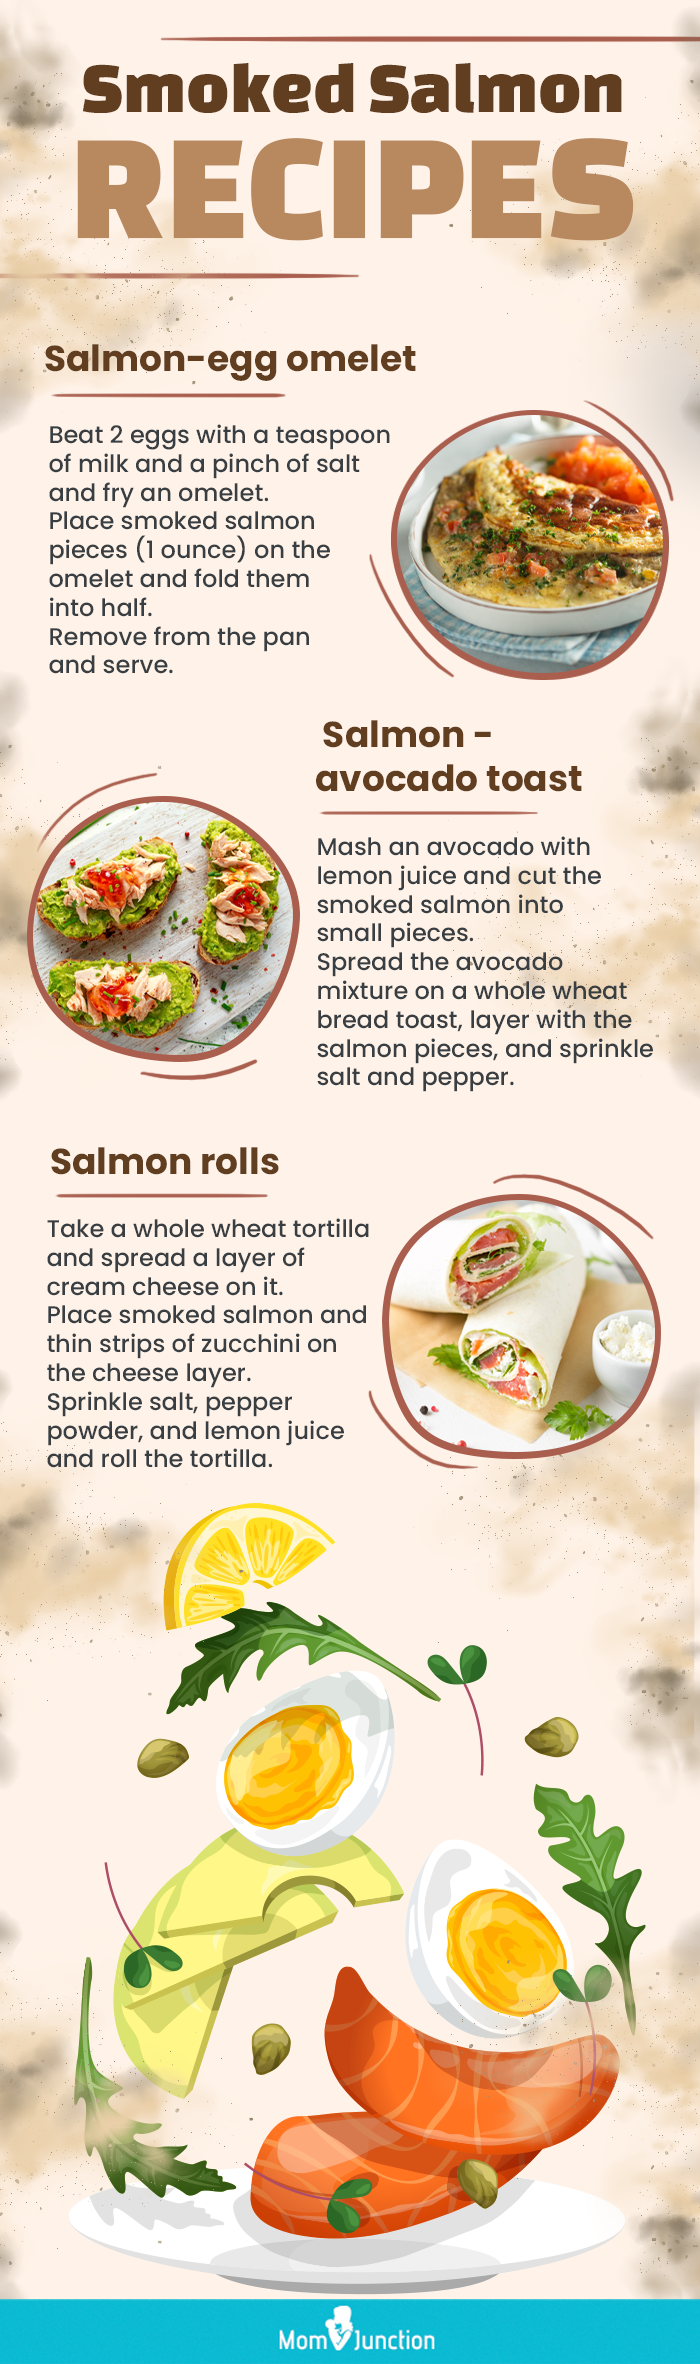 smoked salmon during pregnancy (infographic)